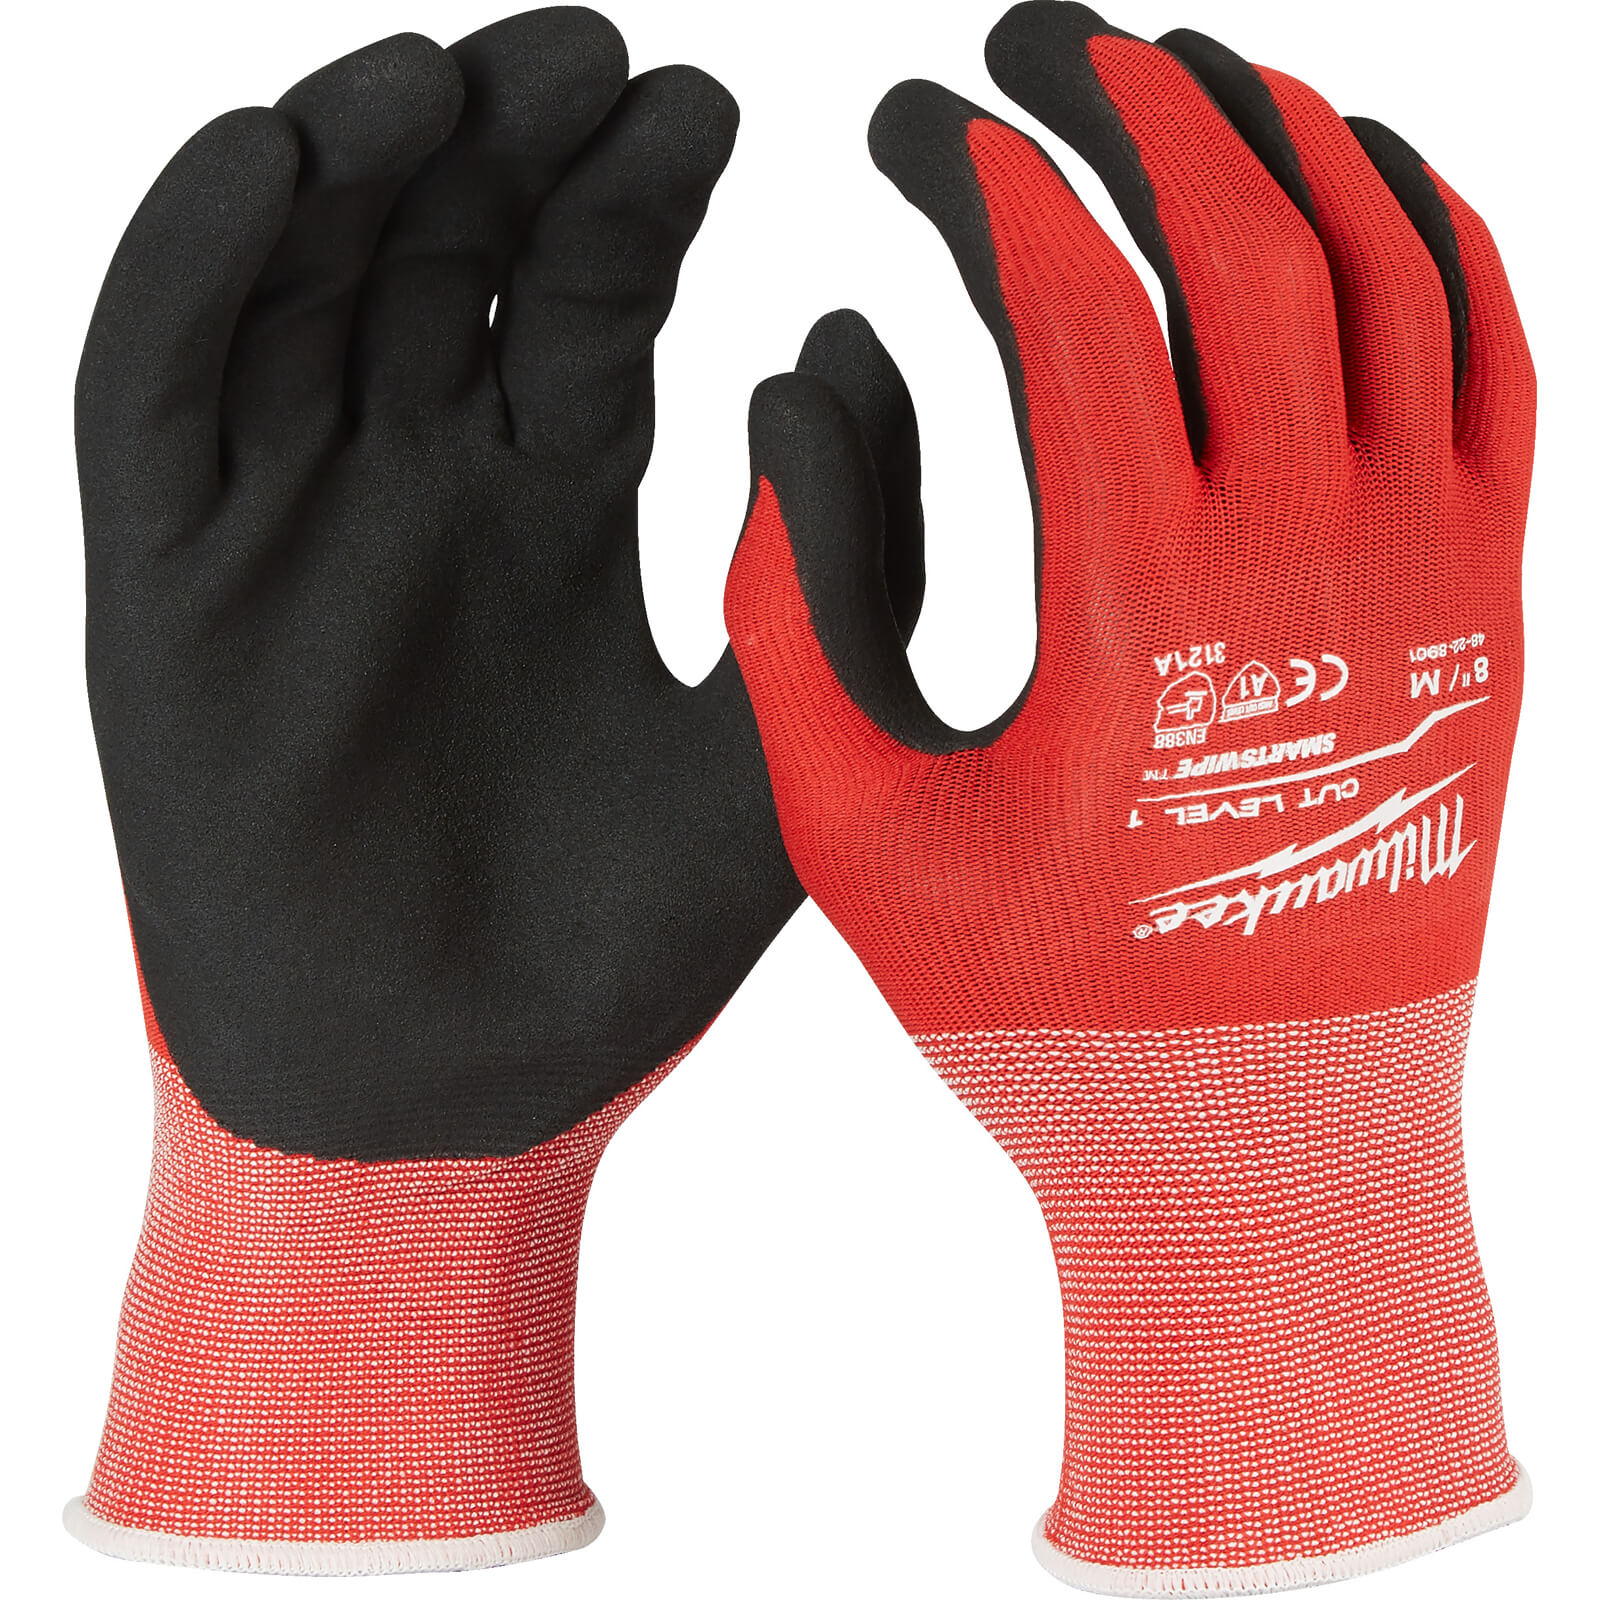 Image of Milwaukee Cut Level 1 Dipped Work Gloves Black / Red S Pack of 12